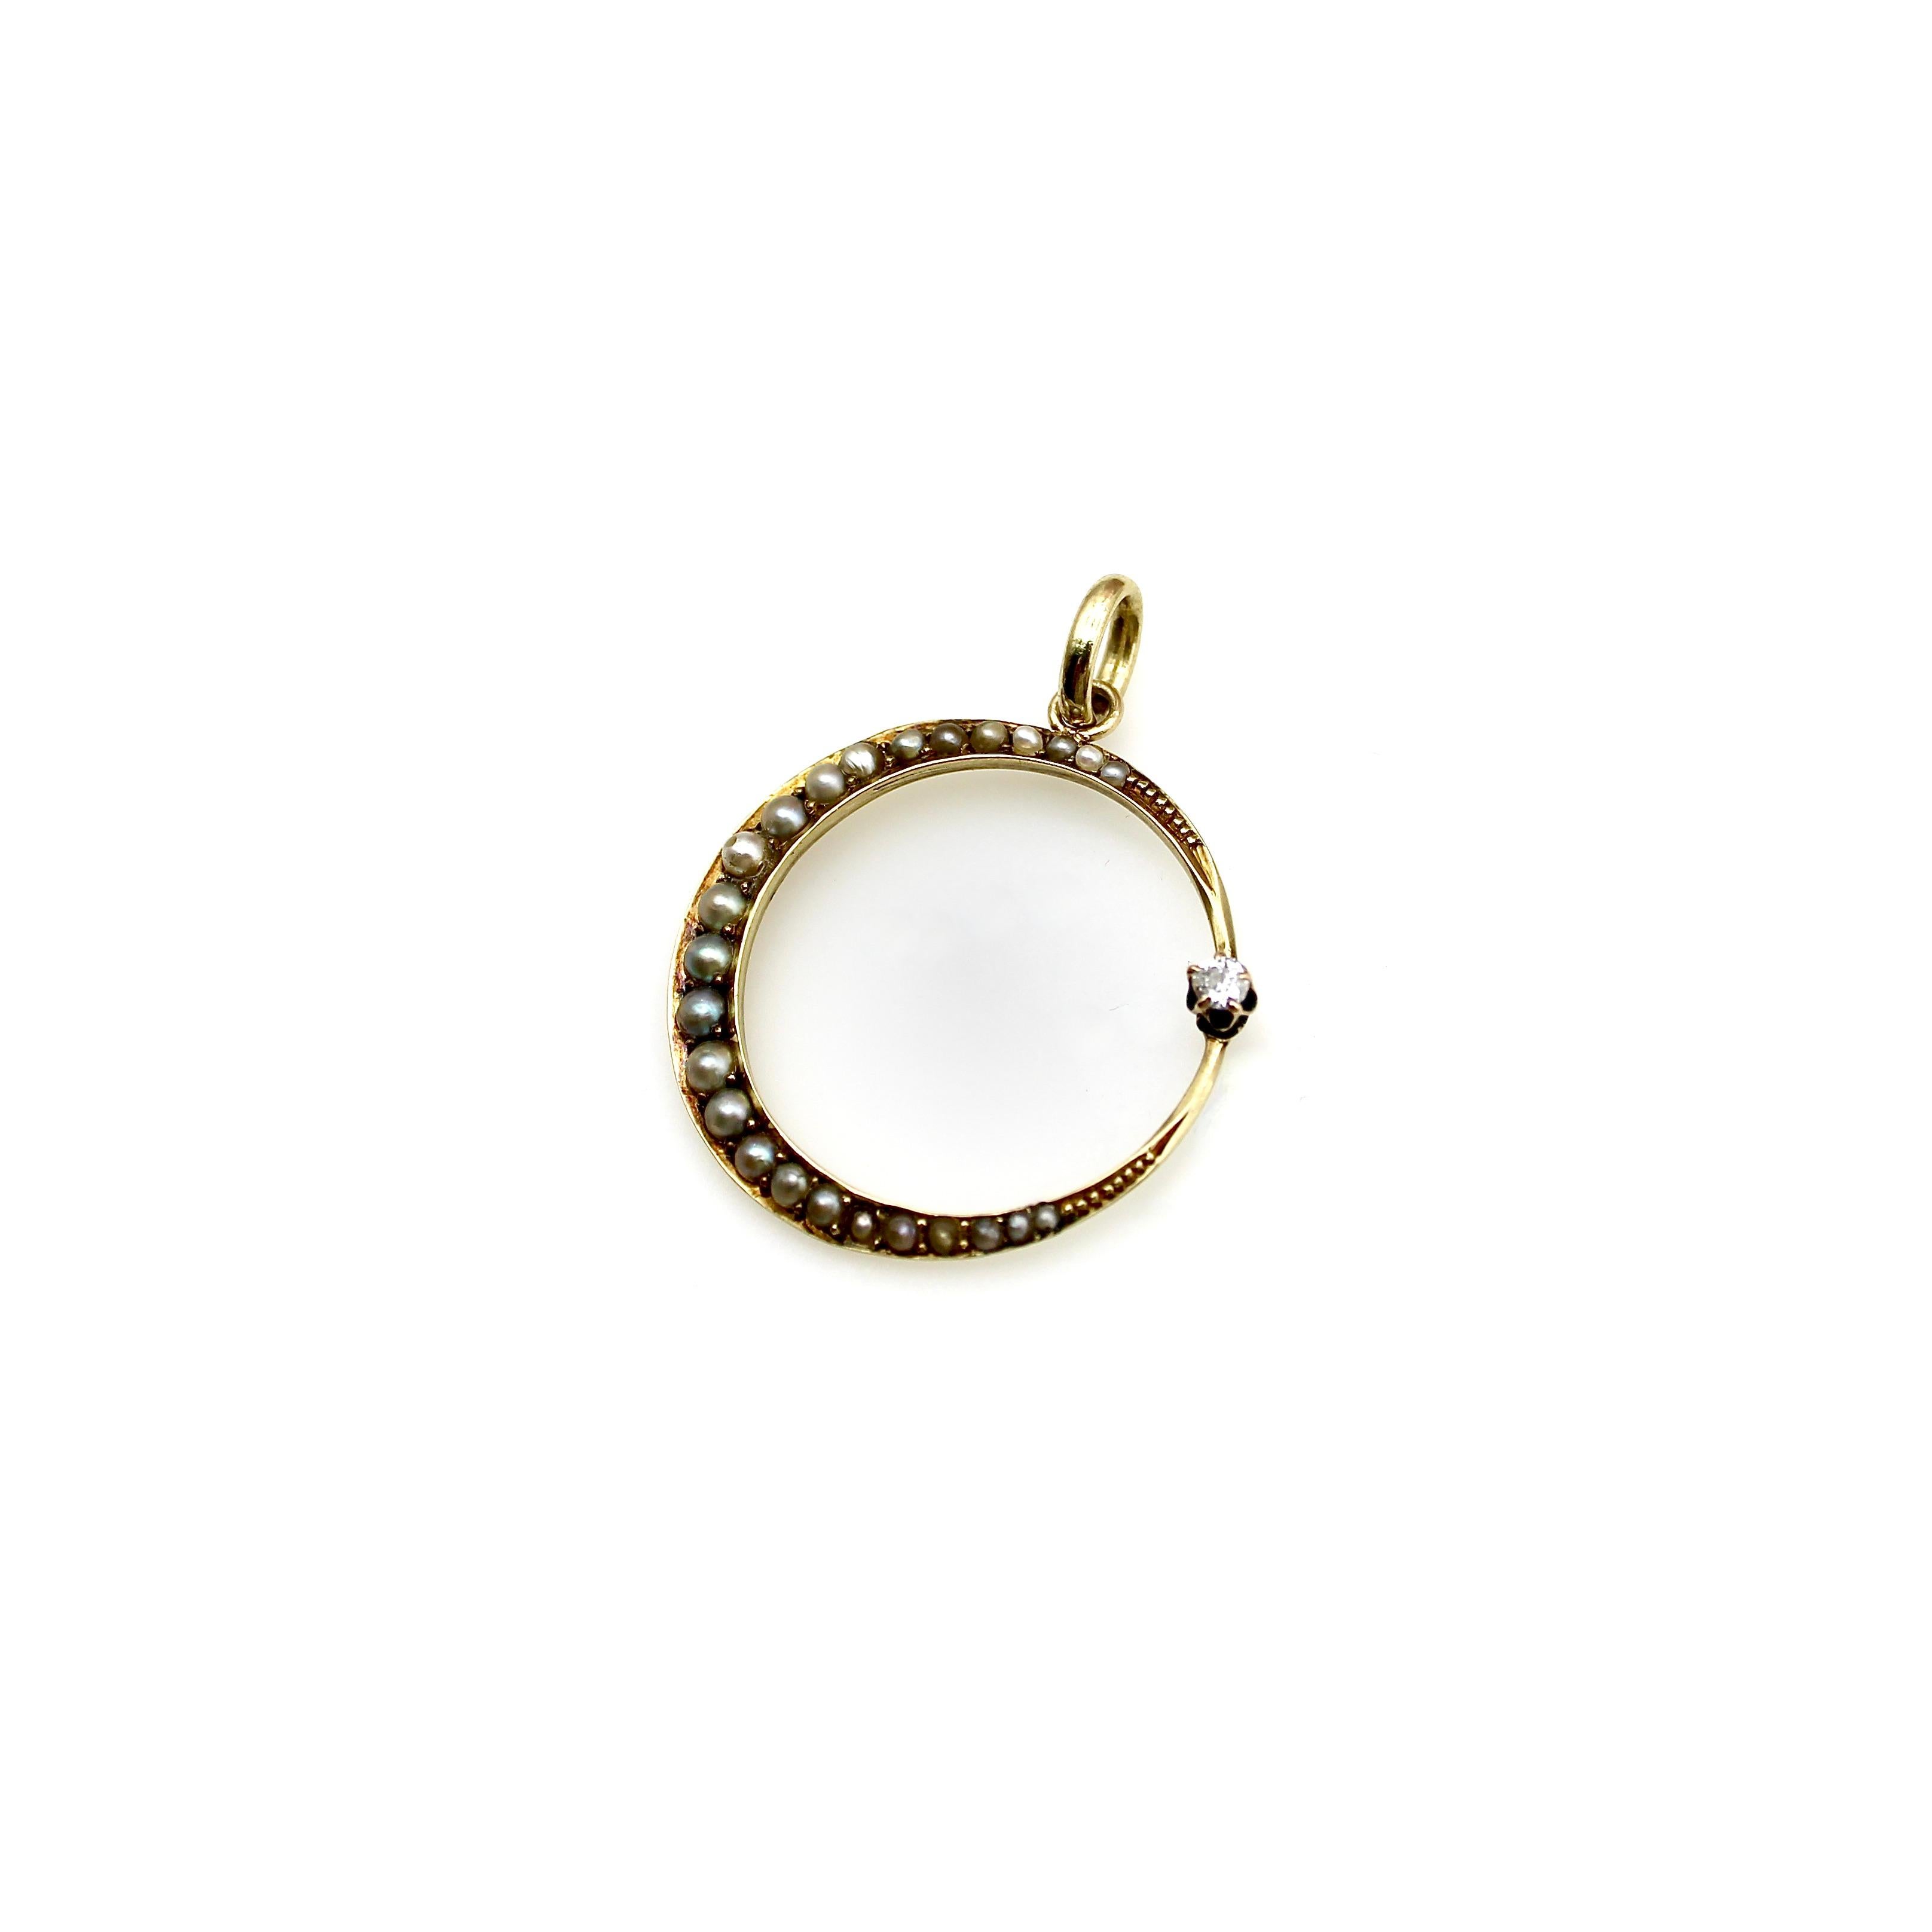 This 14k gold Victorian pendant makes a perfect circle--two edges of a crescent moon are enclosed by an Old Mine Cut diamond. Held in place by a five-prong setting, the diamond represents a star. The moon is dotted with seed pearls that descend in